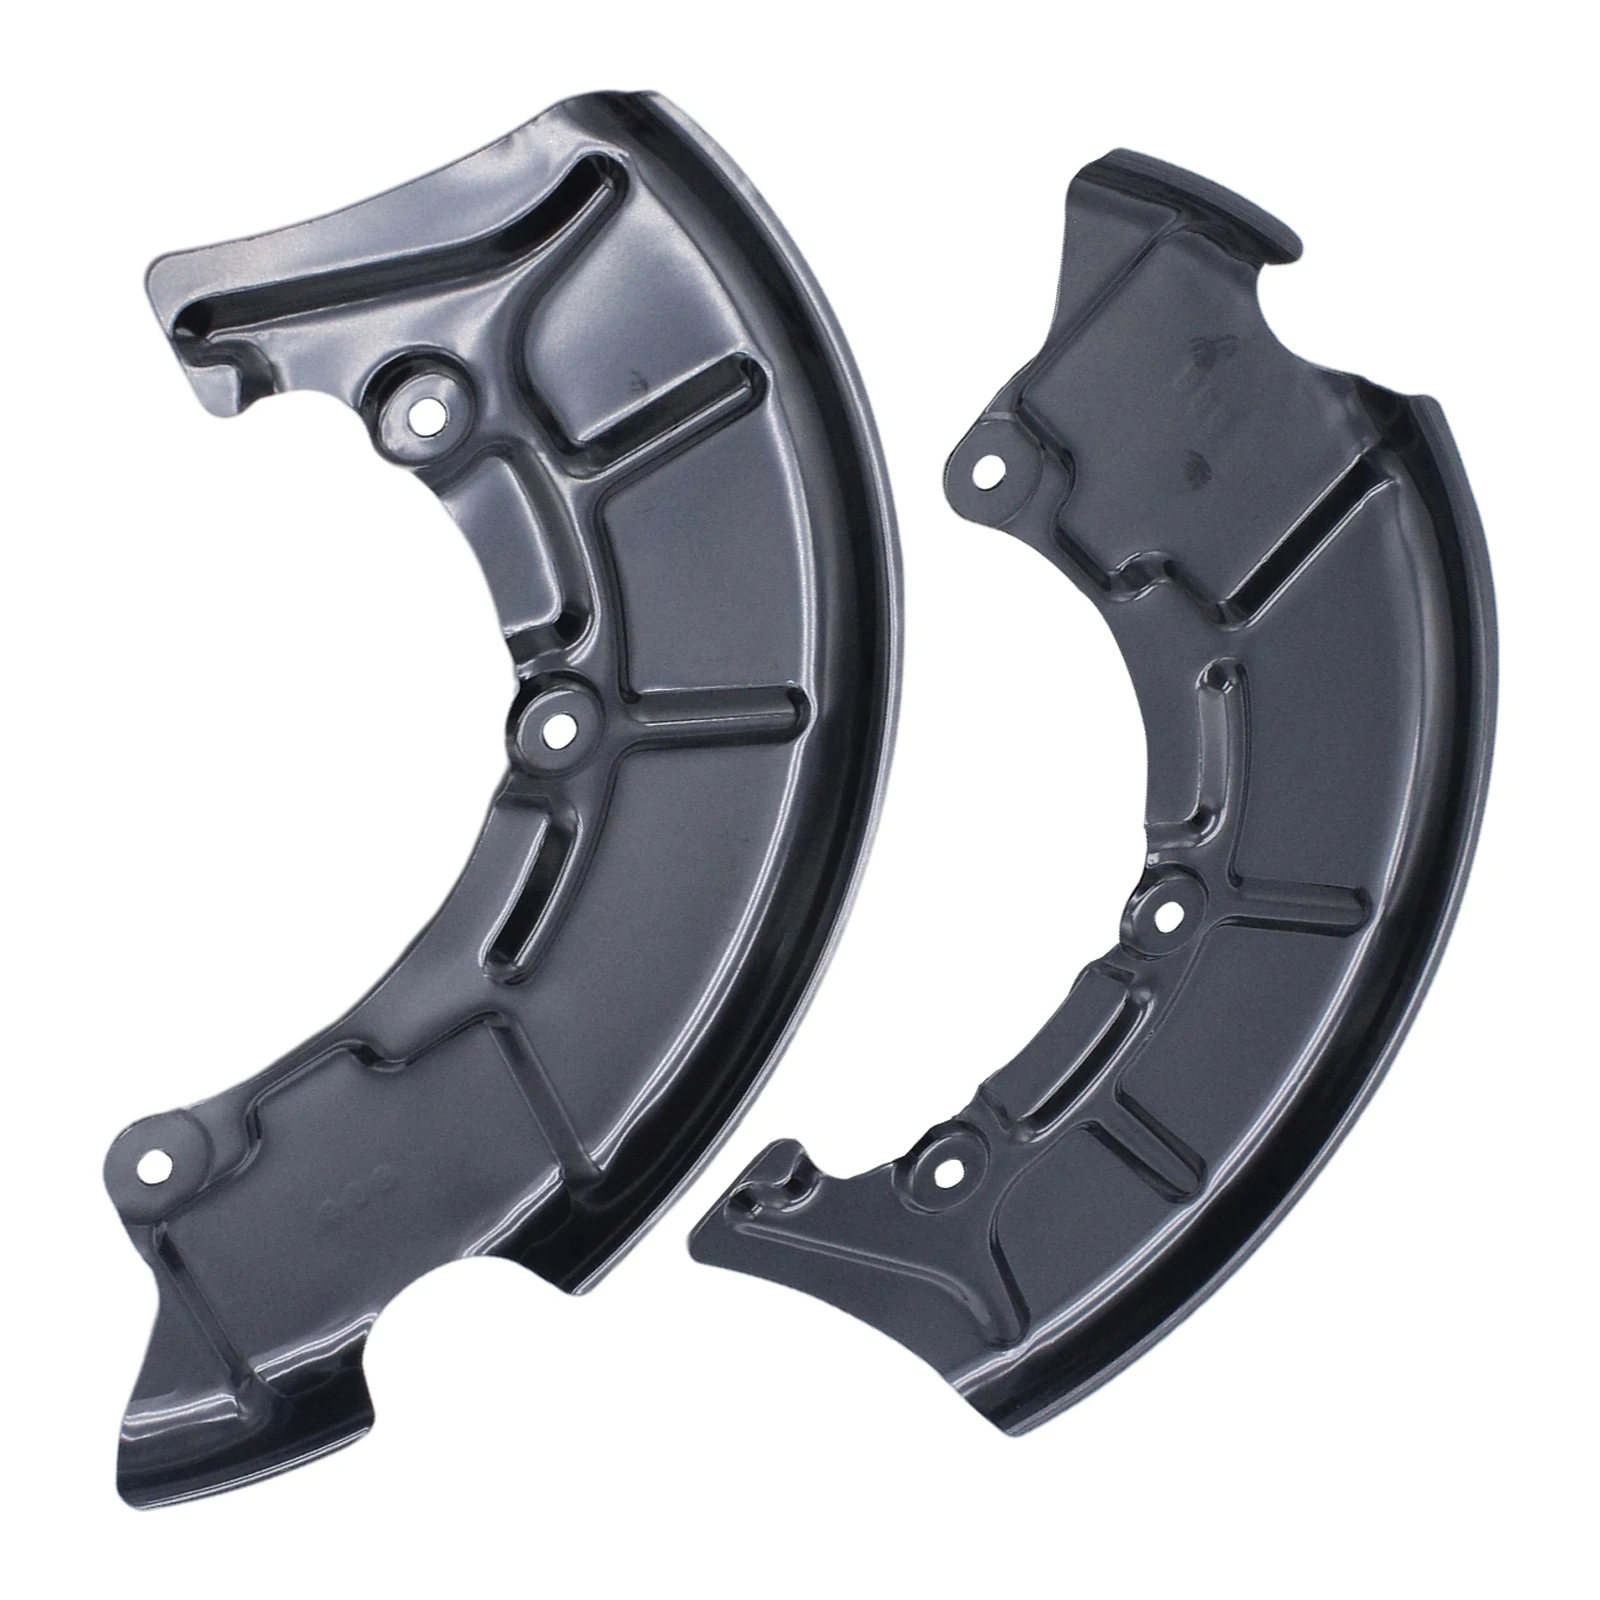 2 Pieces Front Disc Brake Cover Dust Shield Splash Plate for Golf 2000-2004 1J0615312A Replacement Acc